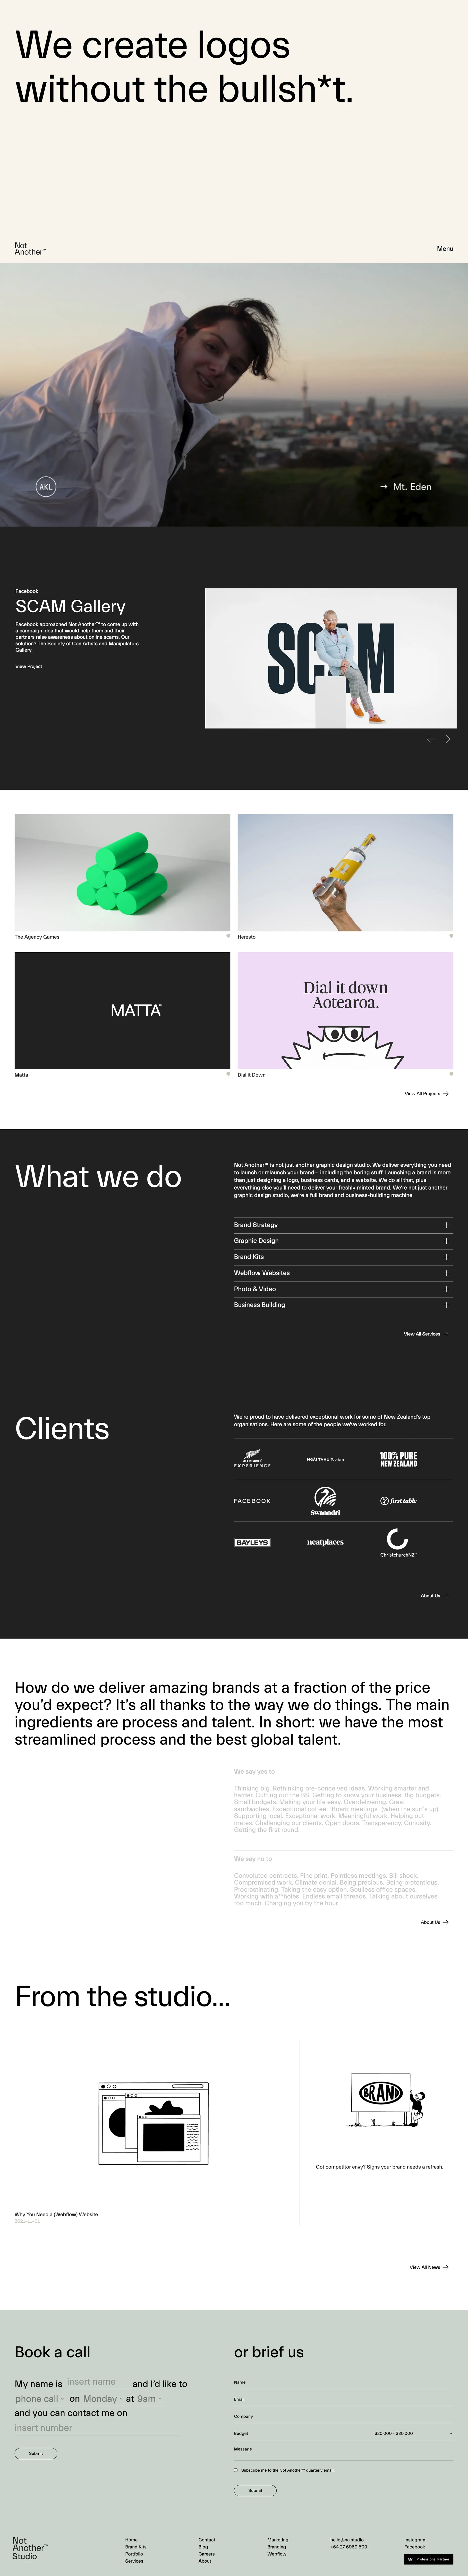 Not Another Landing Page Example: Not Another™ is a full service creative agency with studios in Christchurch and Sydney. Branding, campaigns, content, Webflow – we cover it all.